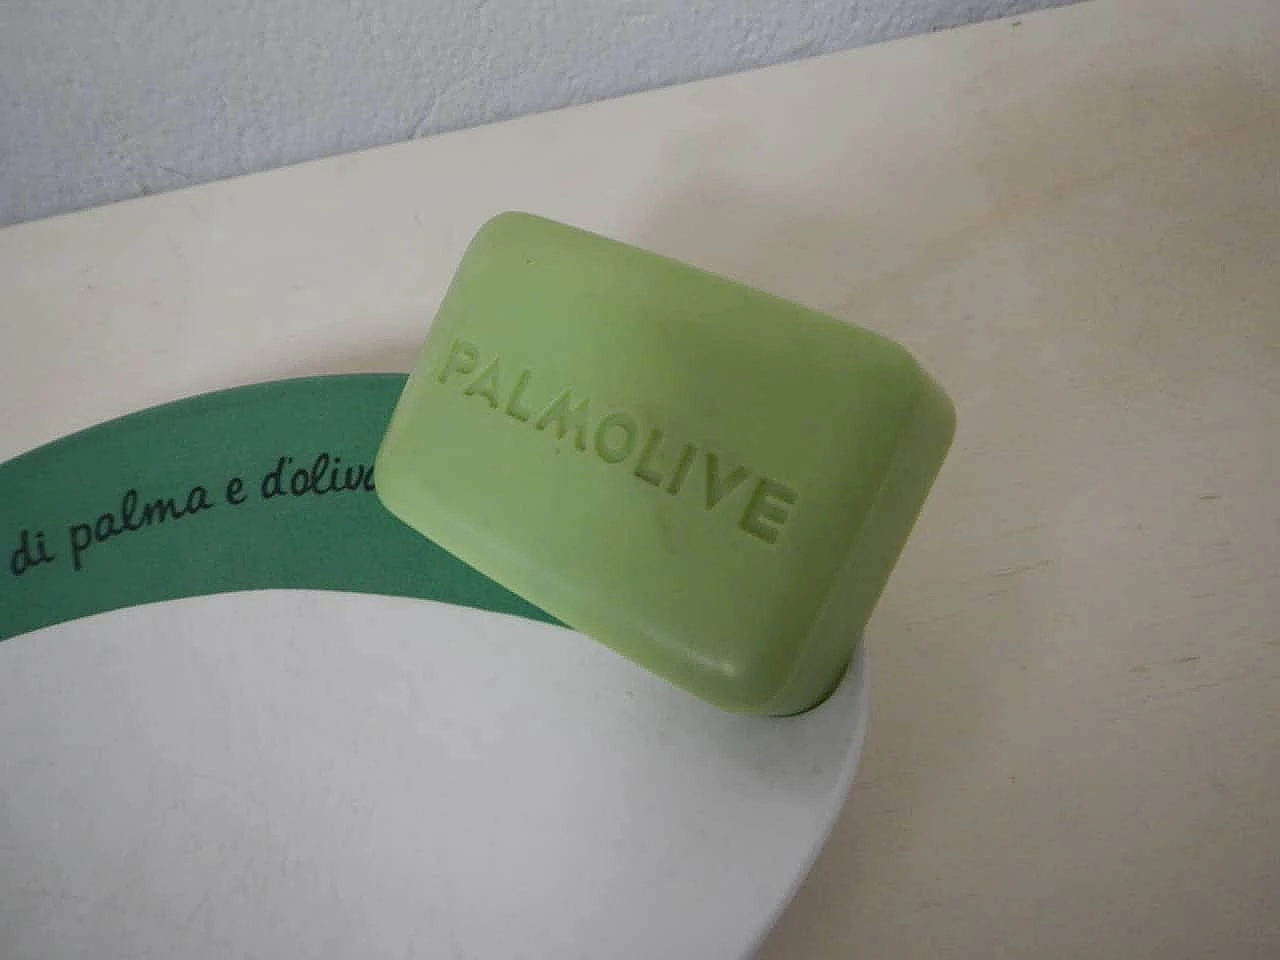 Palmolive advertising container, 1960s 3